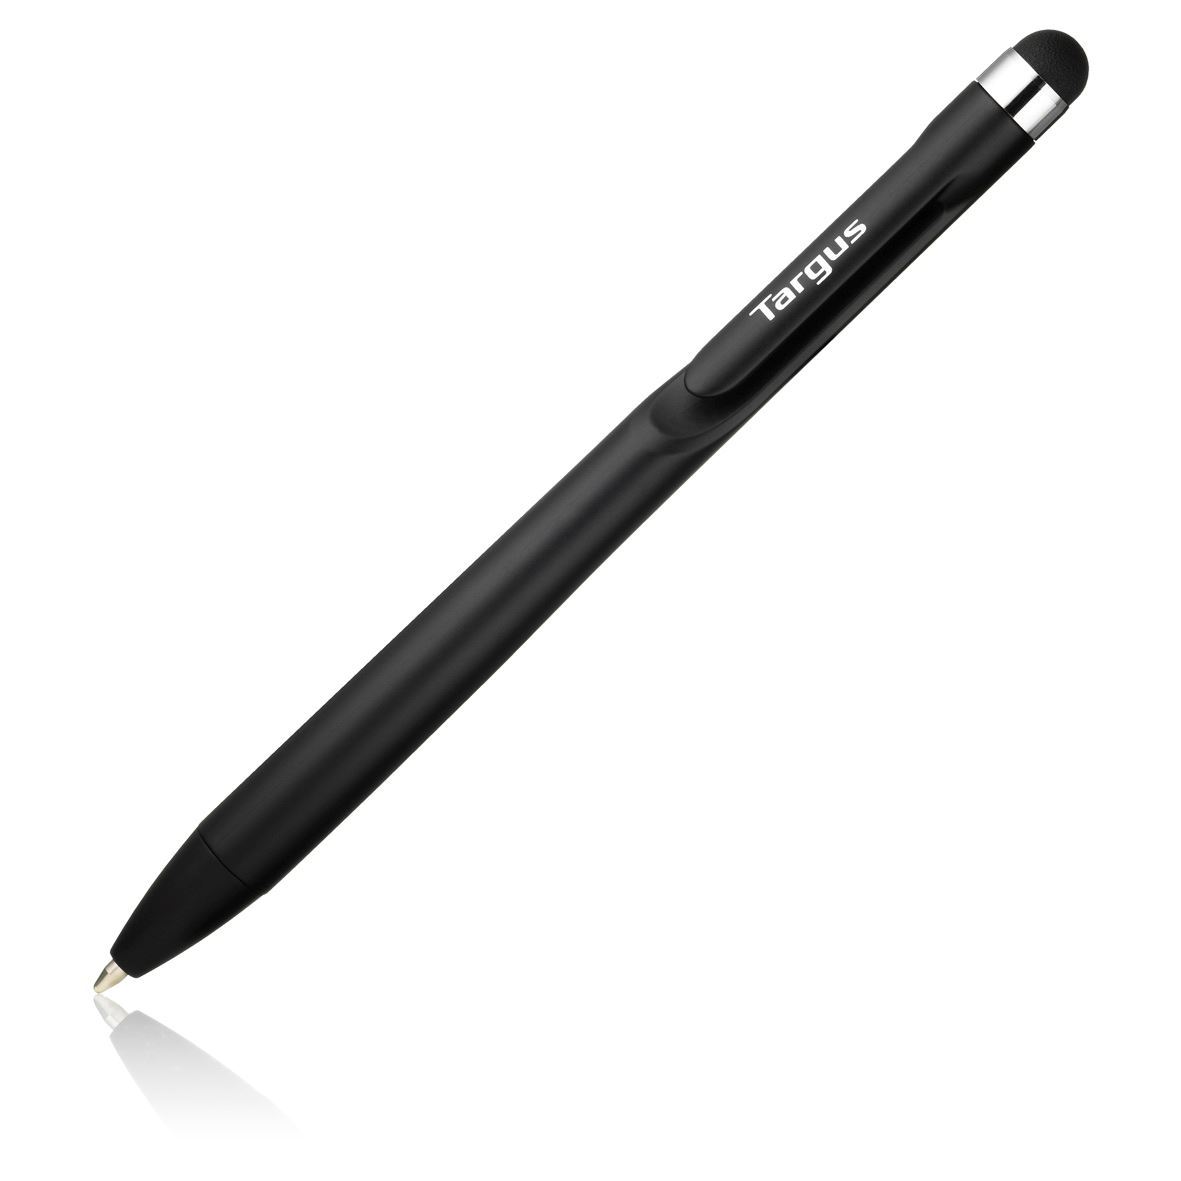 Targus 2 in 1 Pen Stylus for all To   uchscreen Devices - Black